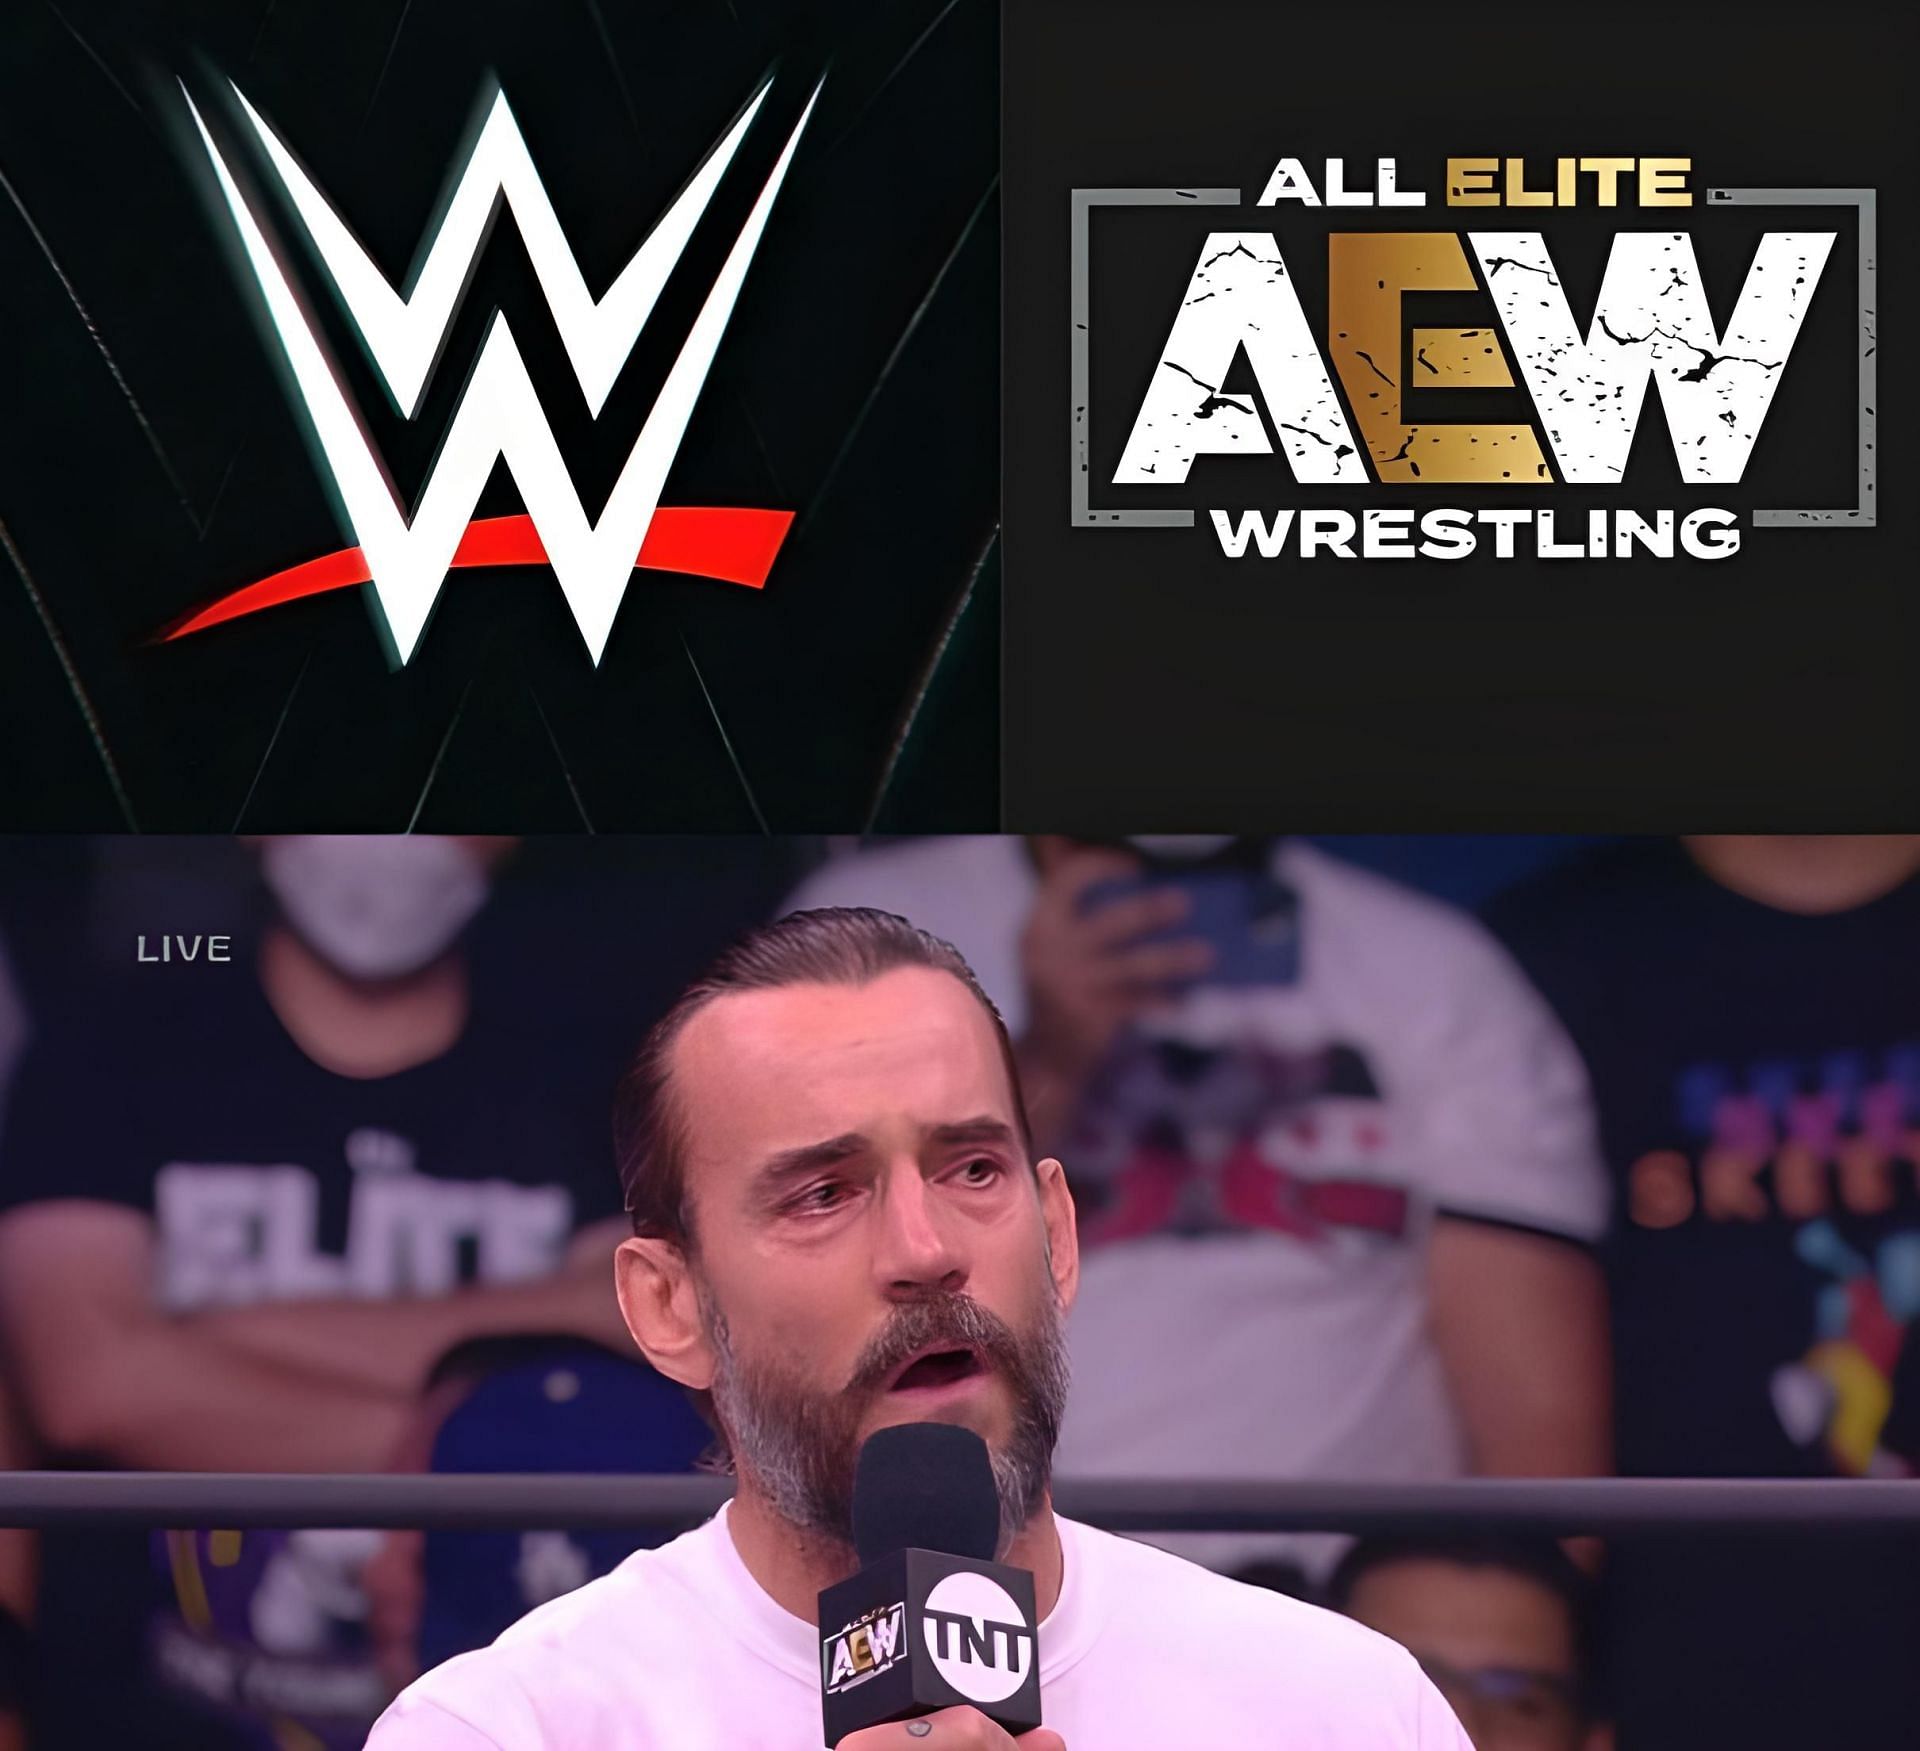 CM Punk voiced an emotional promo at AEW Rampage.